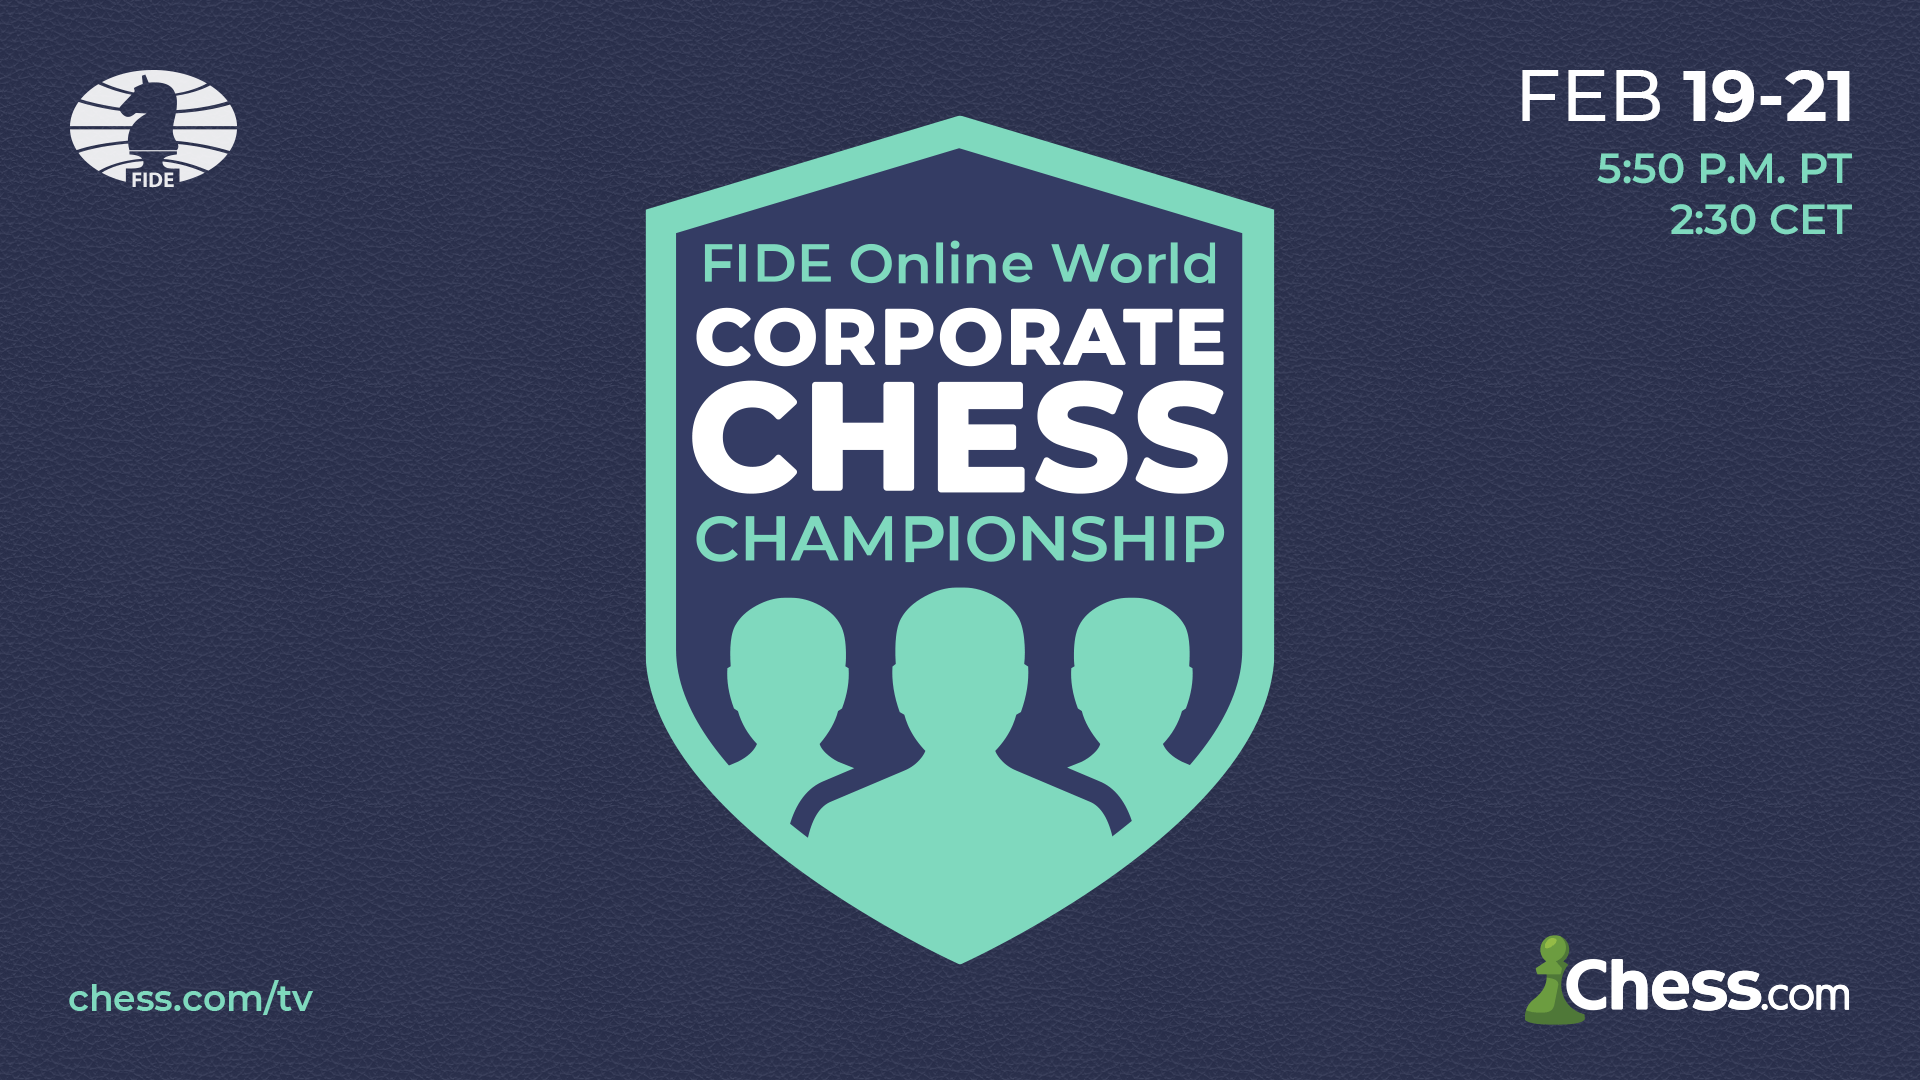 Register Now For The FIDE Online World Corporate Chess Championship